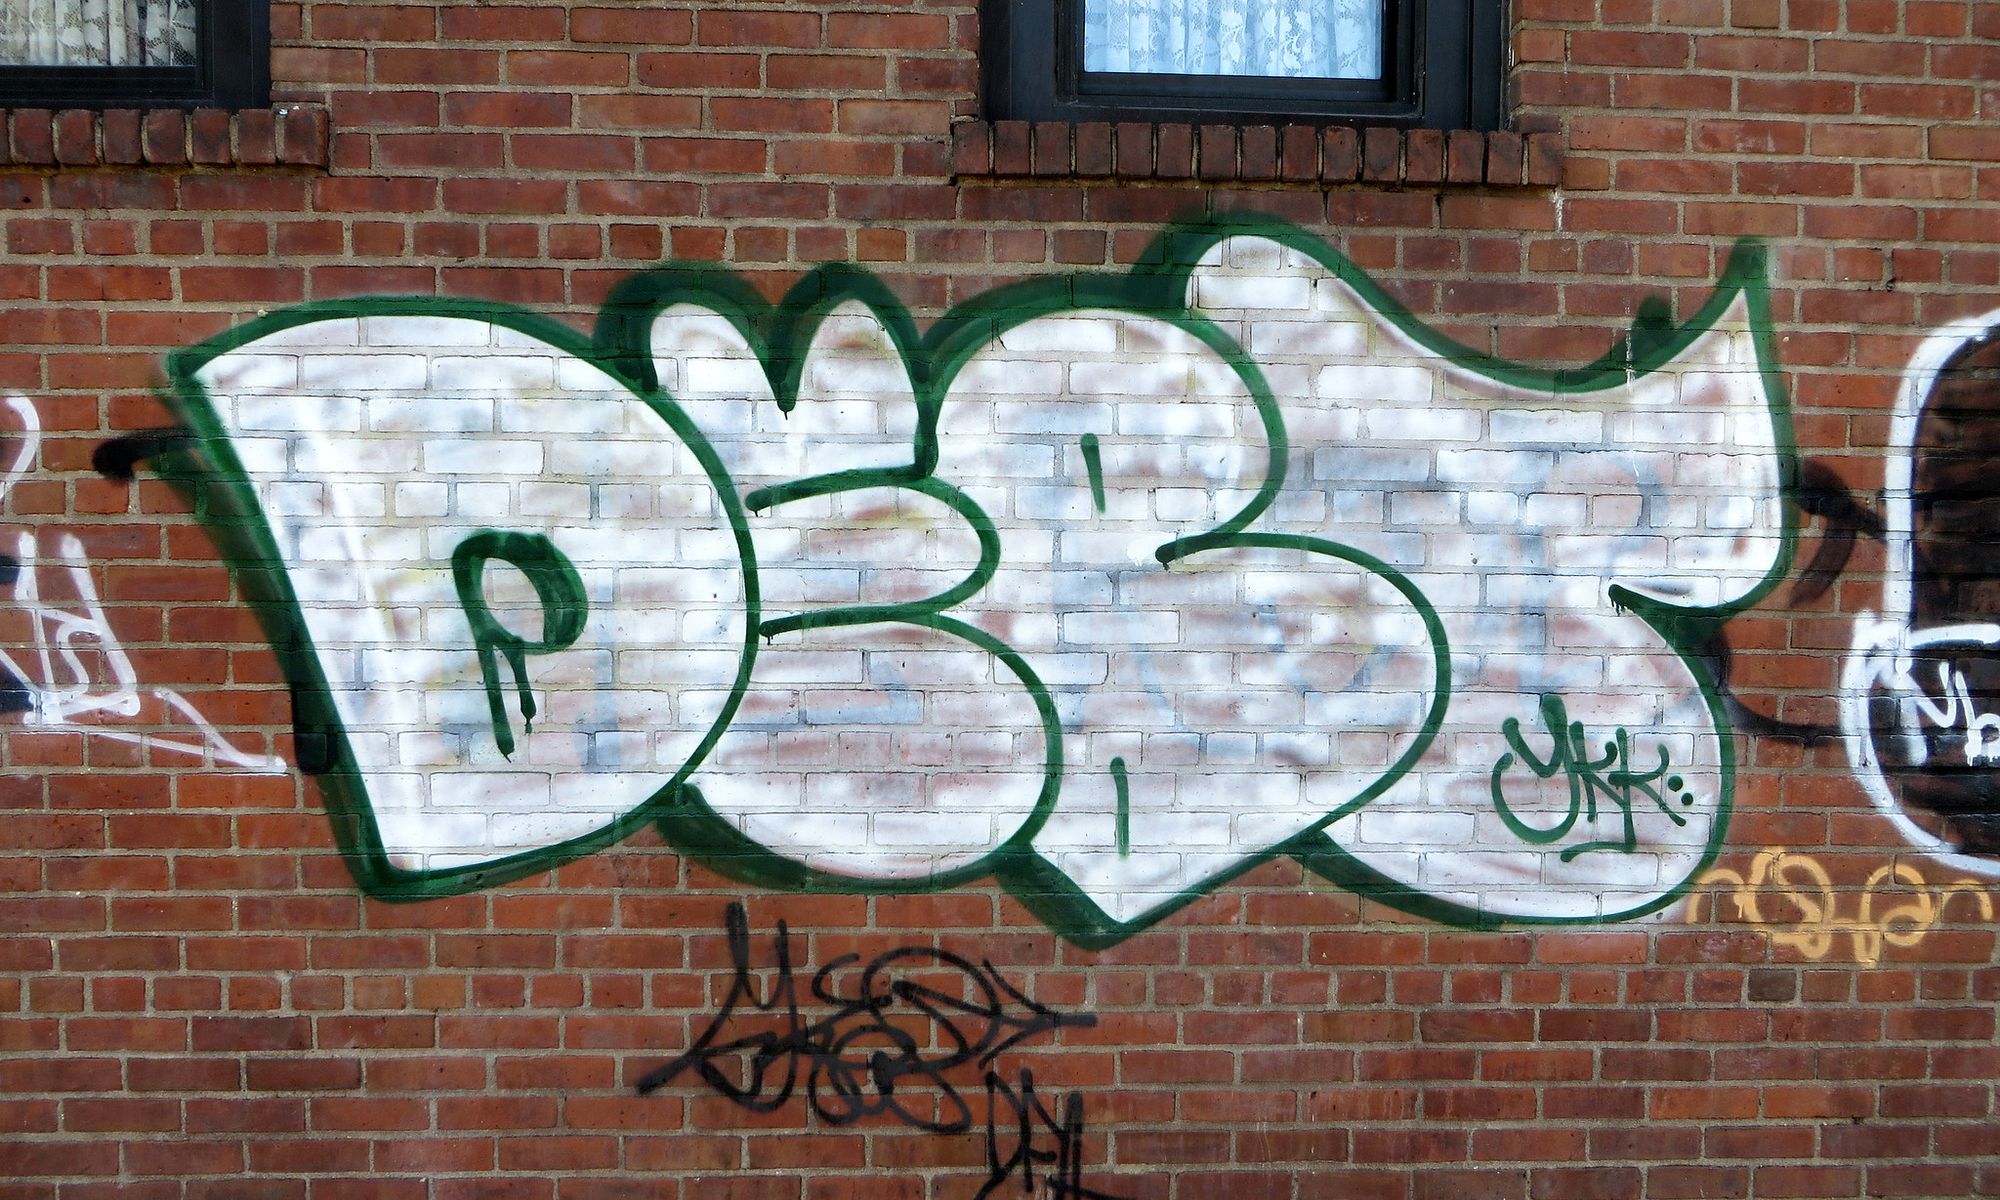 A photo of the word Debt spraypainted on a brick wall: multicolor shading, bubble letters.